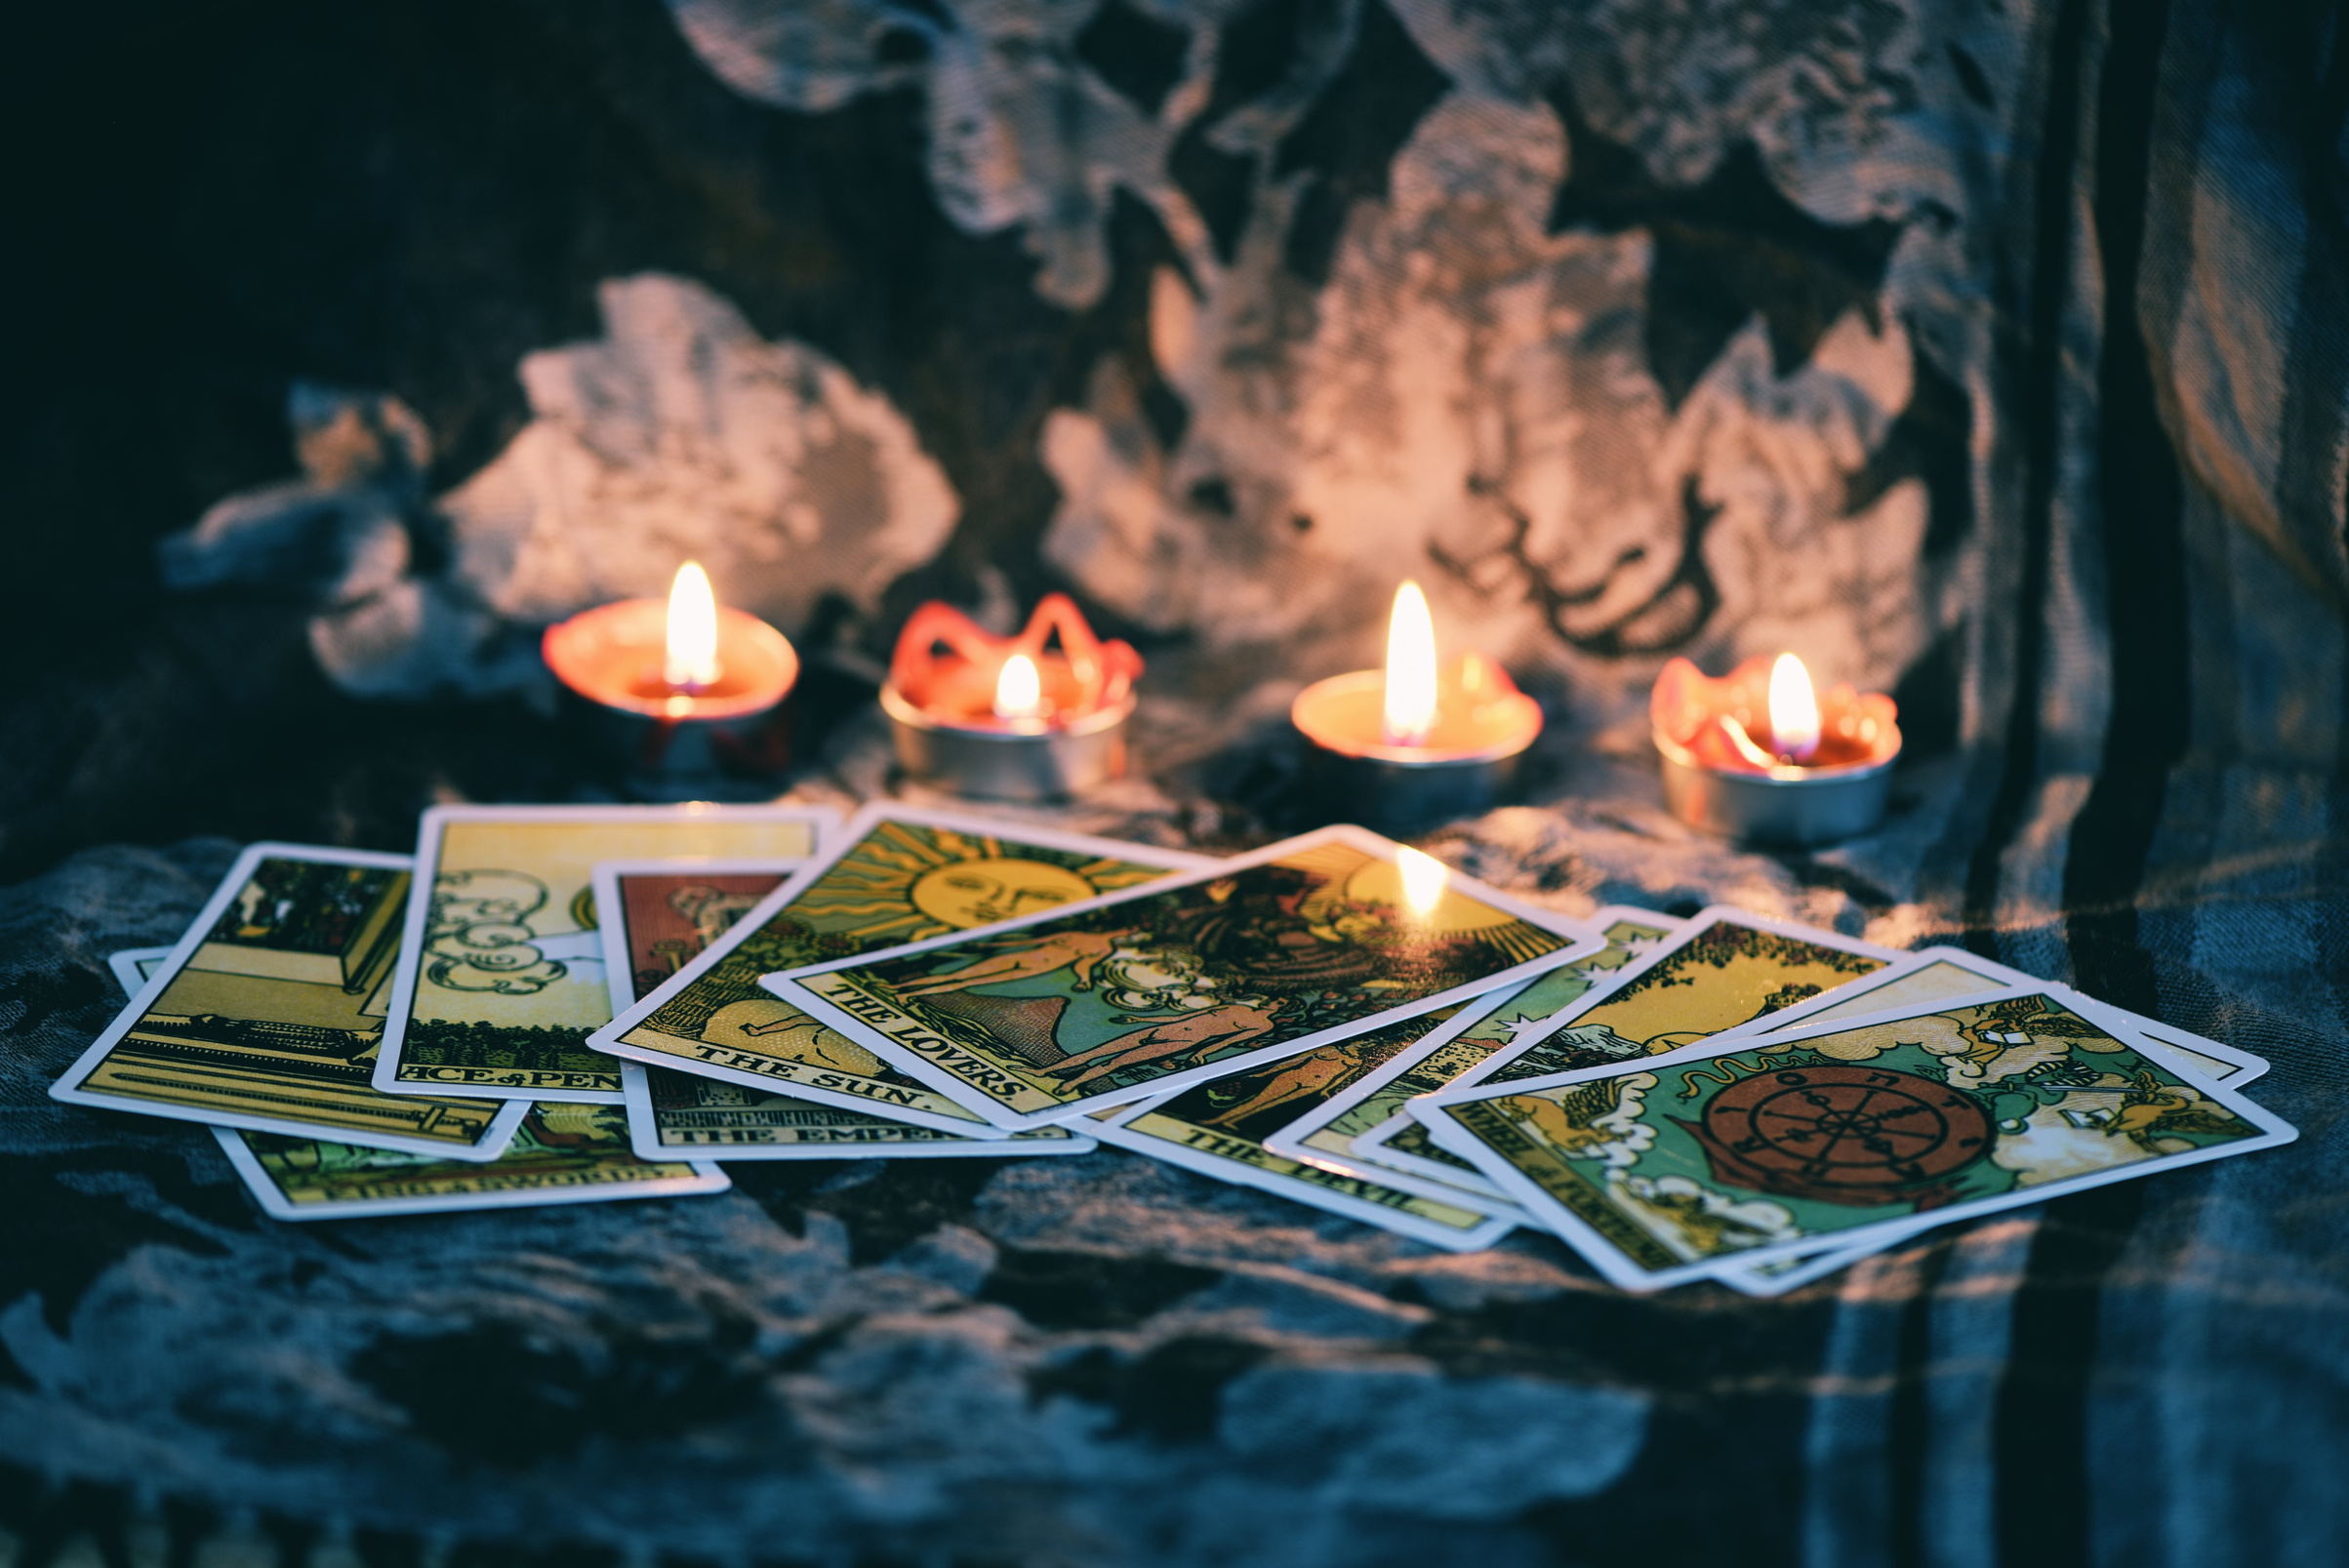 Tarot Card with Candlelight on the Darkness